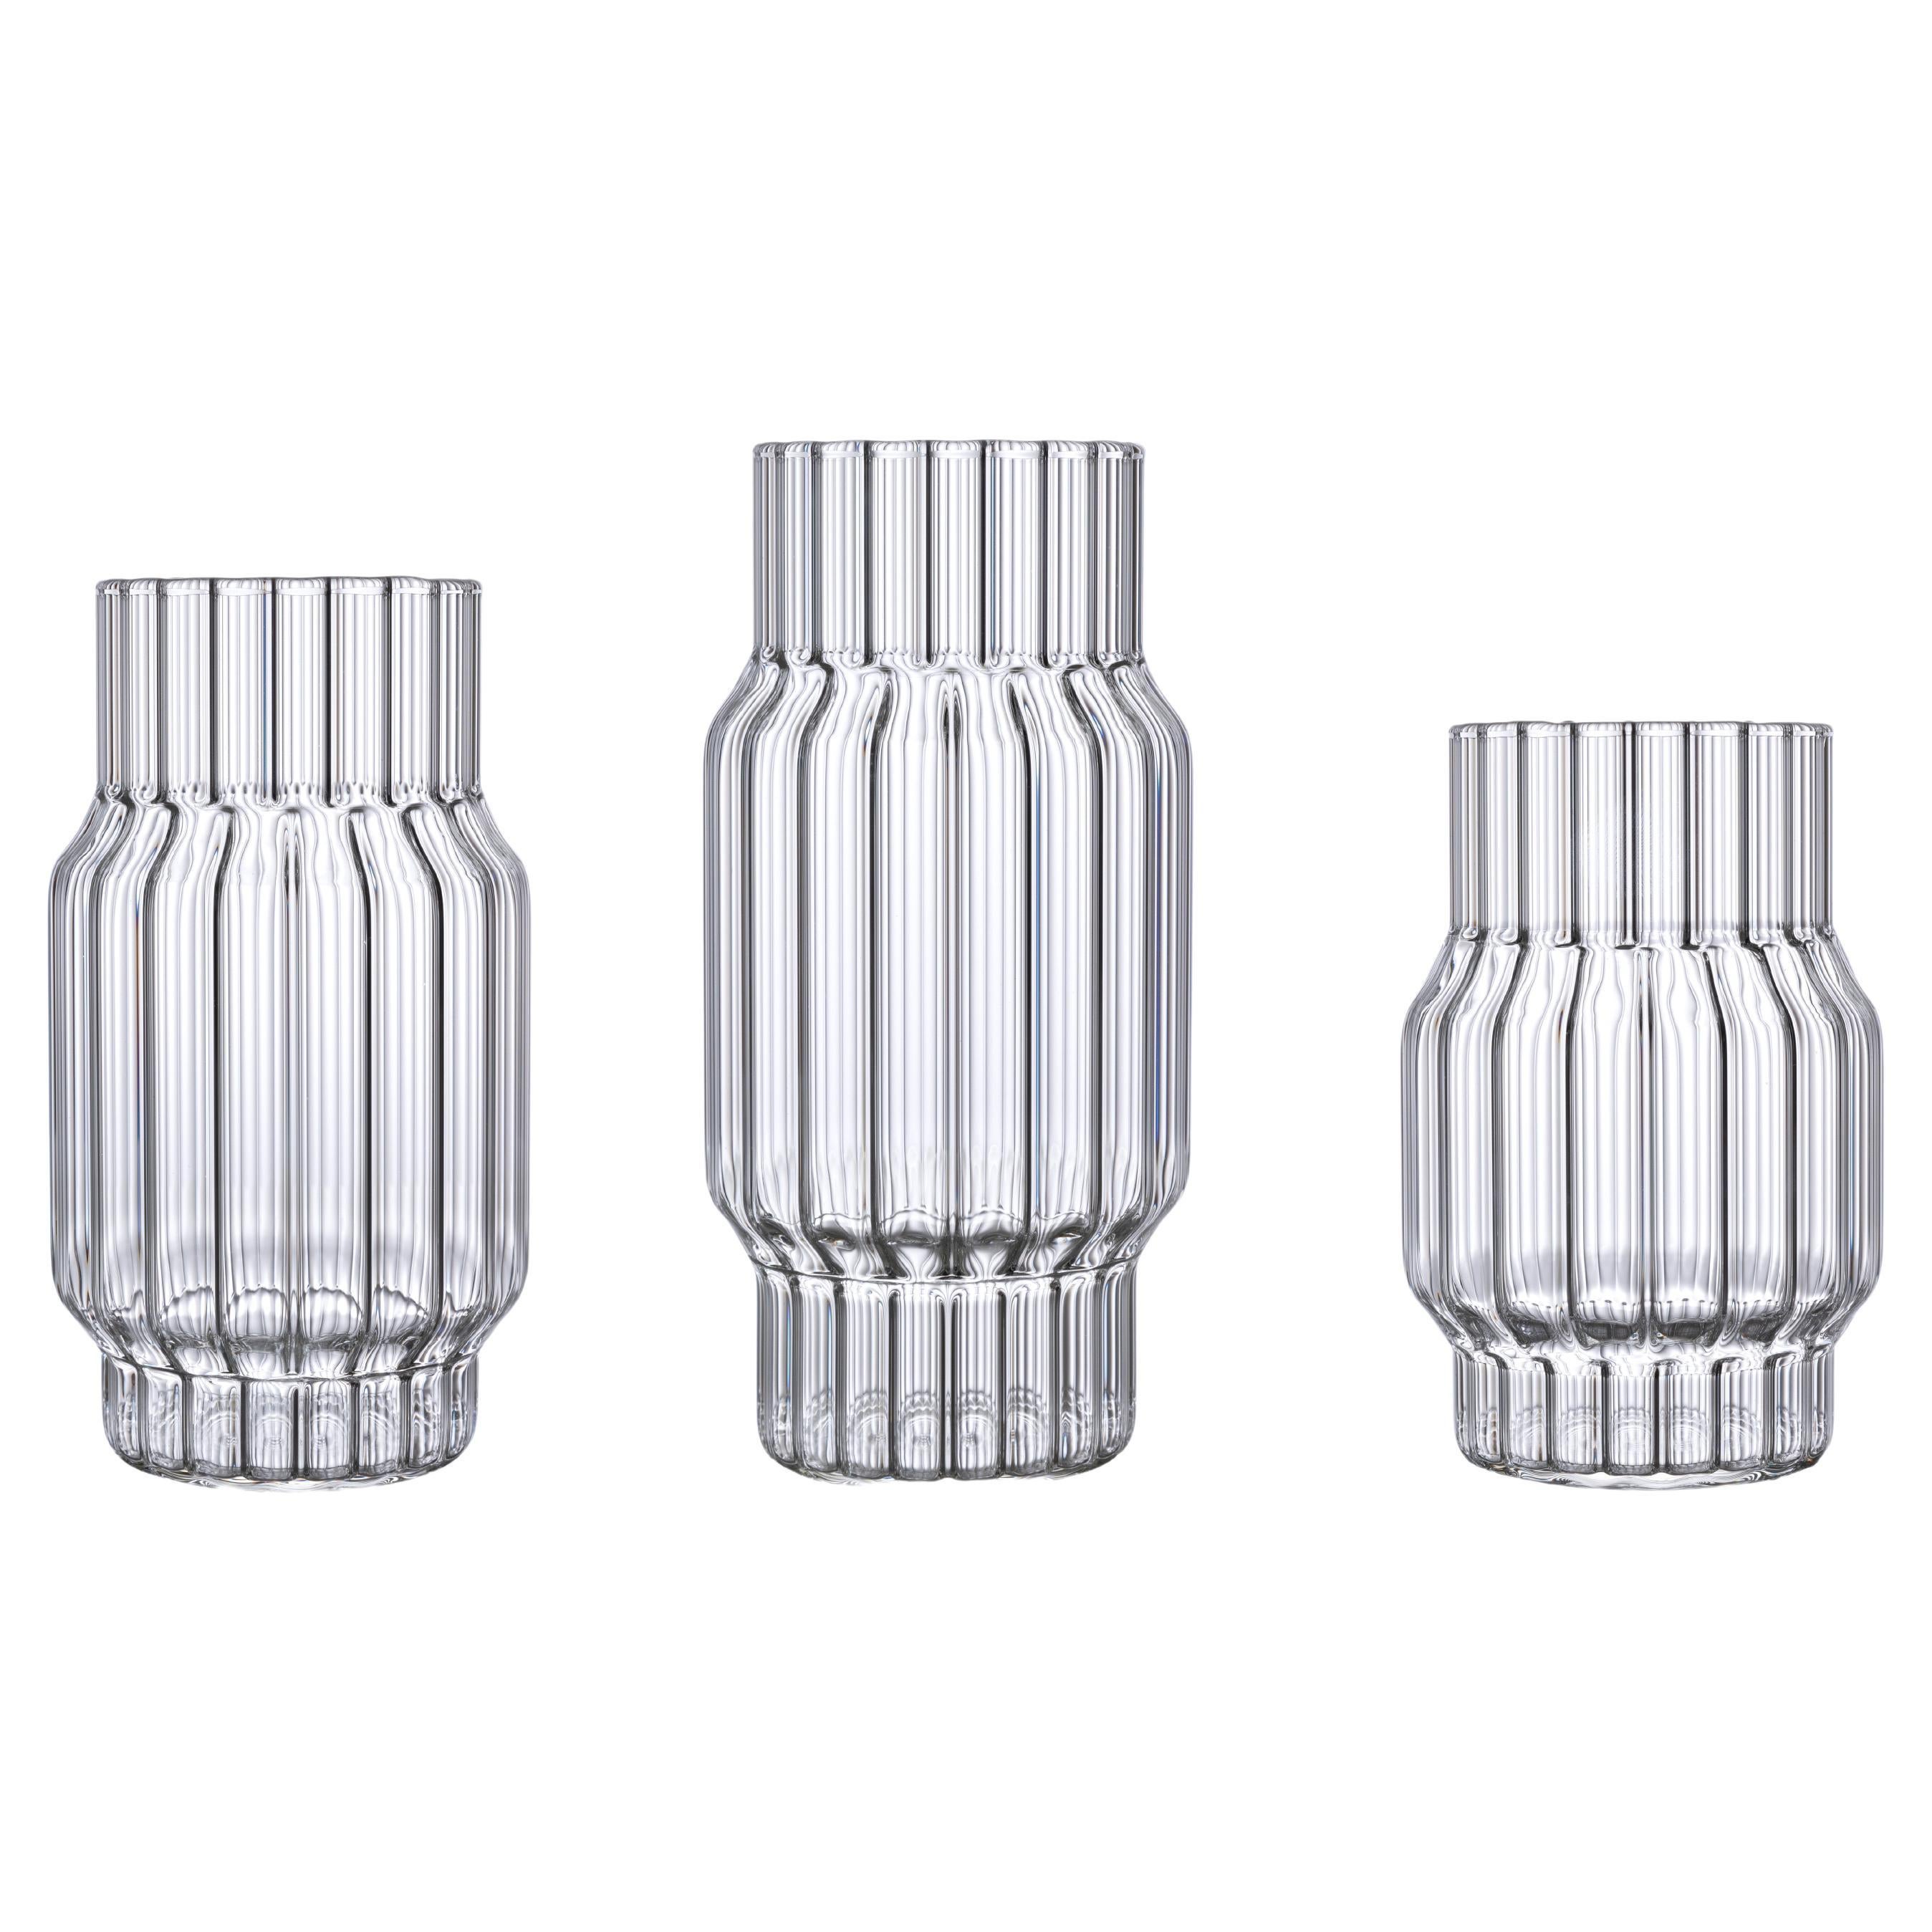 fferrone Contemporary Handcrafted Czech Fluted Glass Vases Set of 3